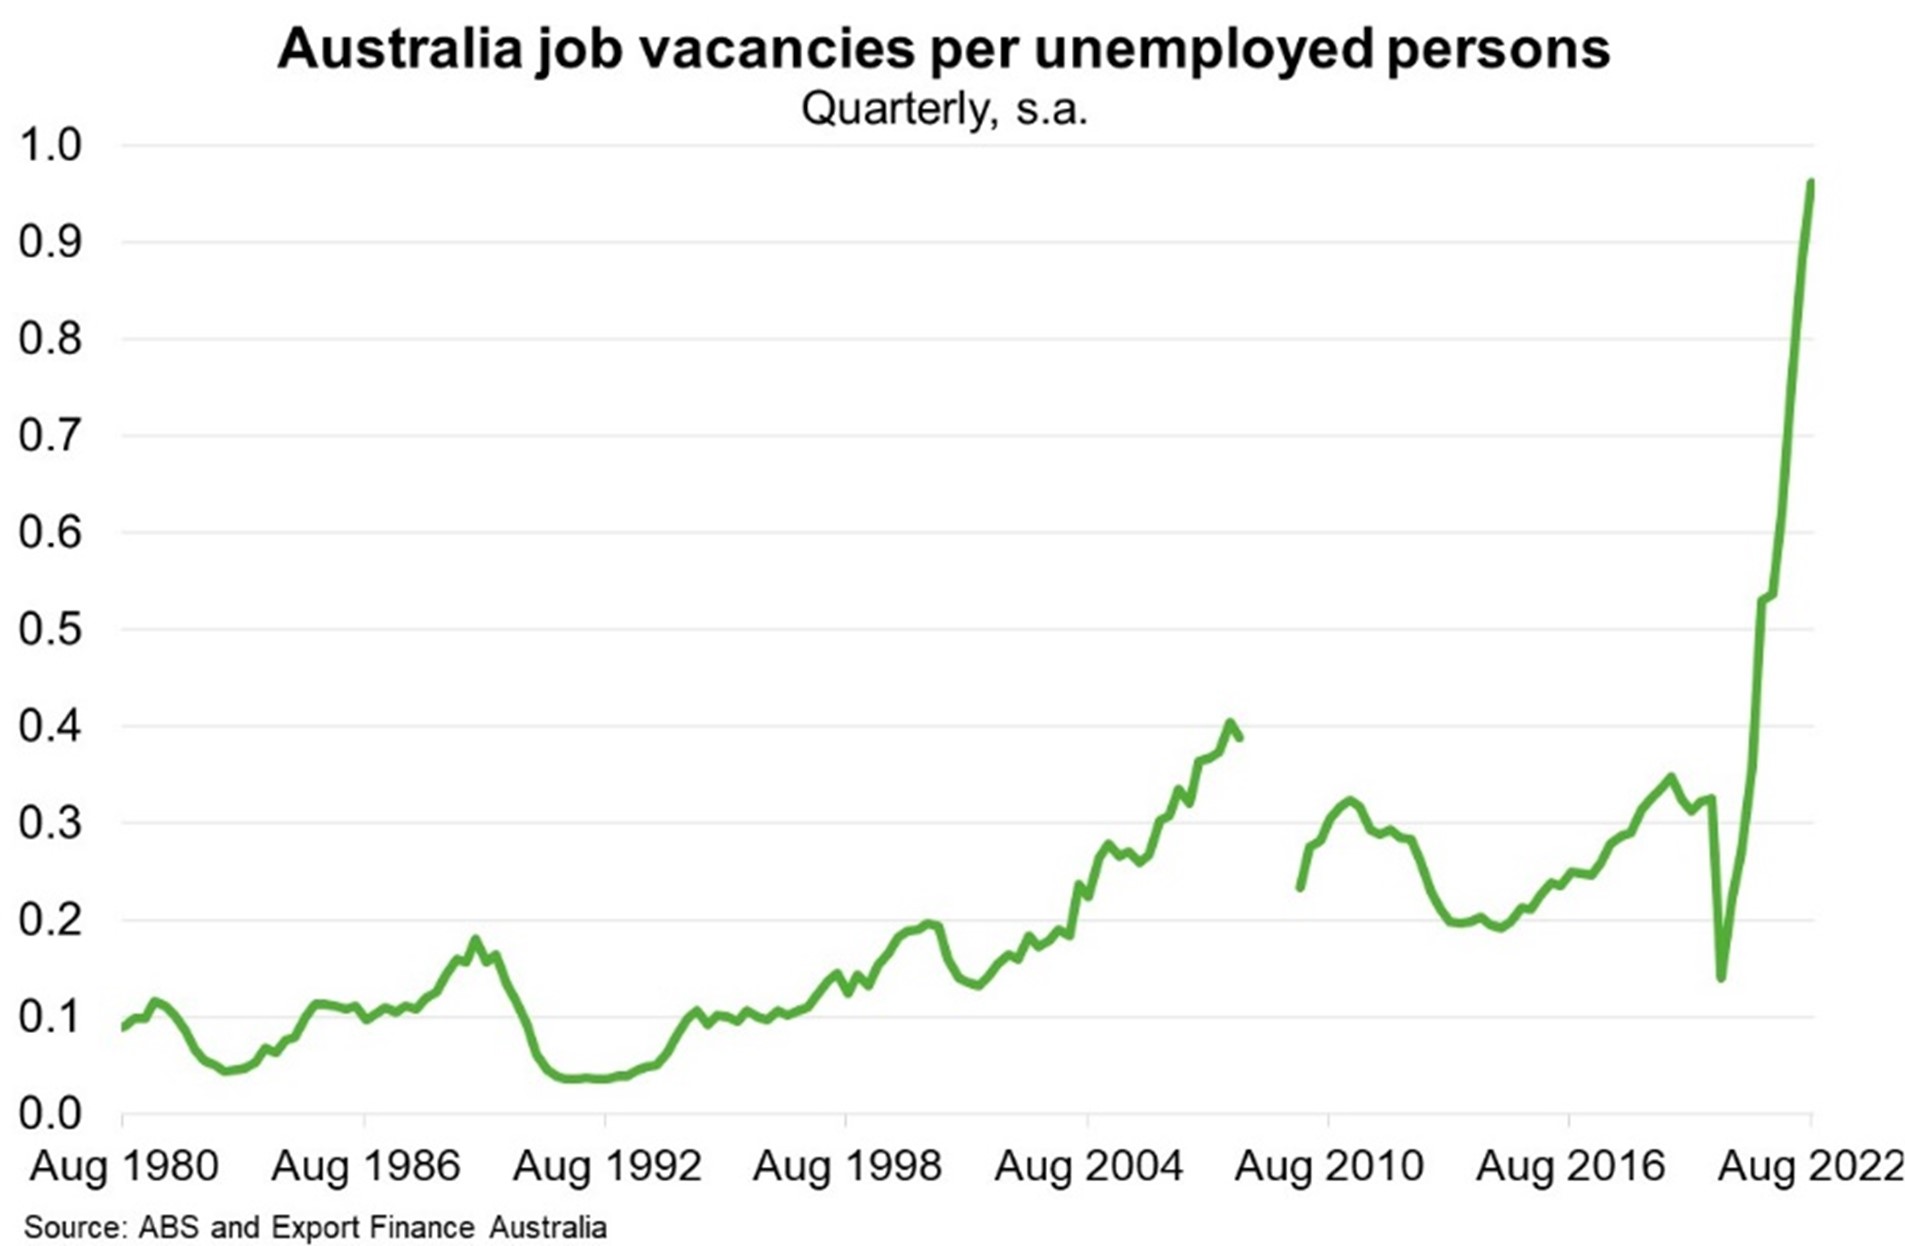 Chart shows line graph of Australian job vacancies per unemployed persons from August 1980 to August 2022. Text above chart discusses findings.